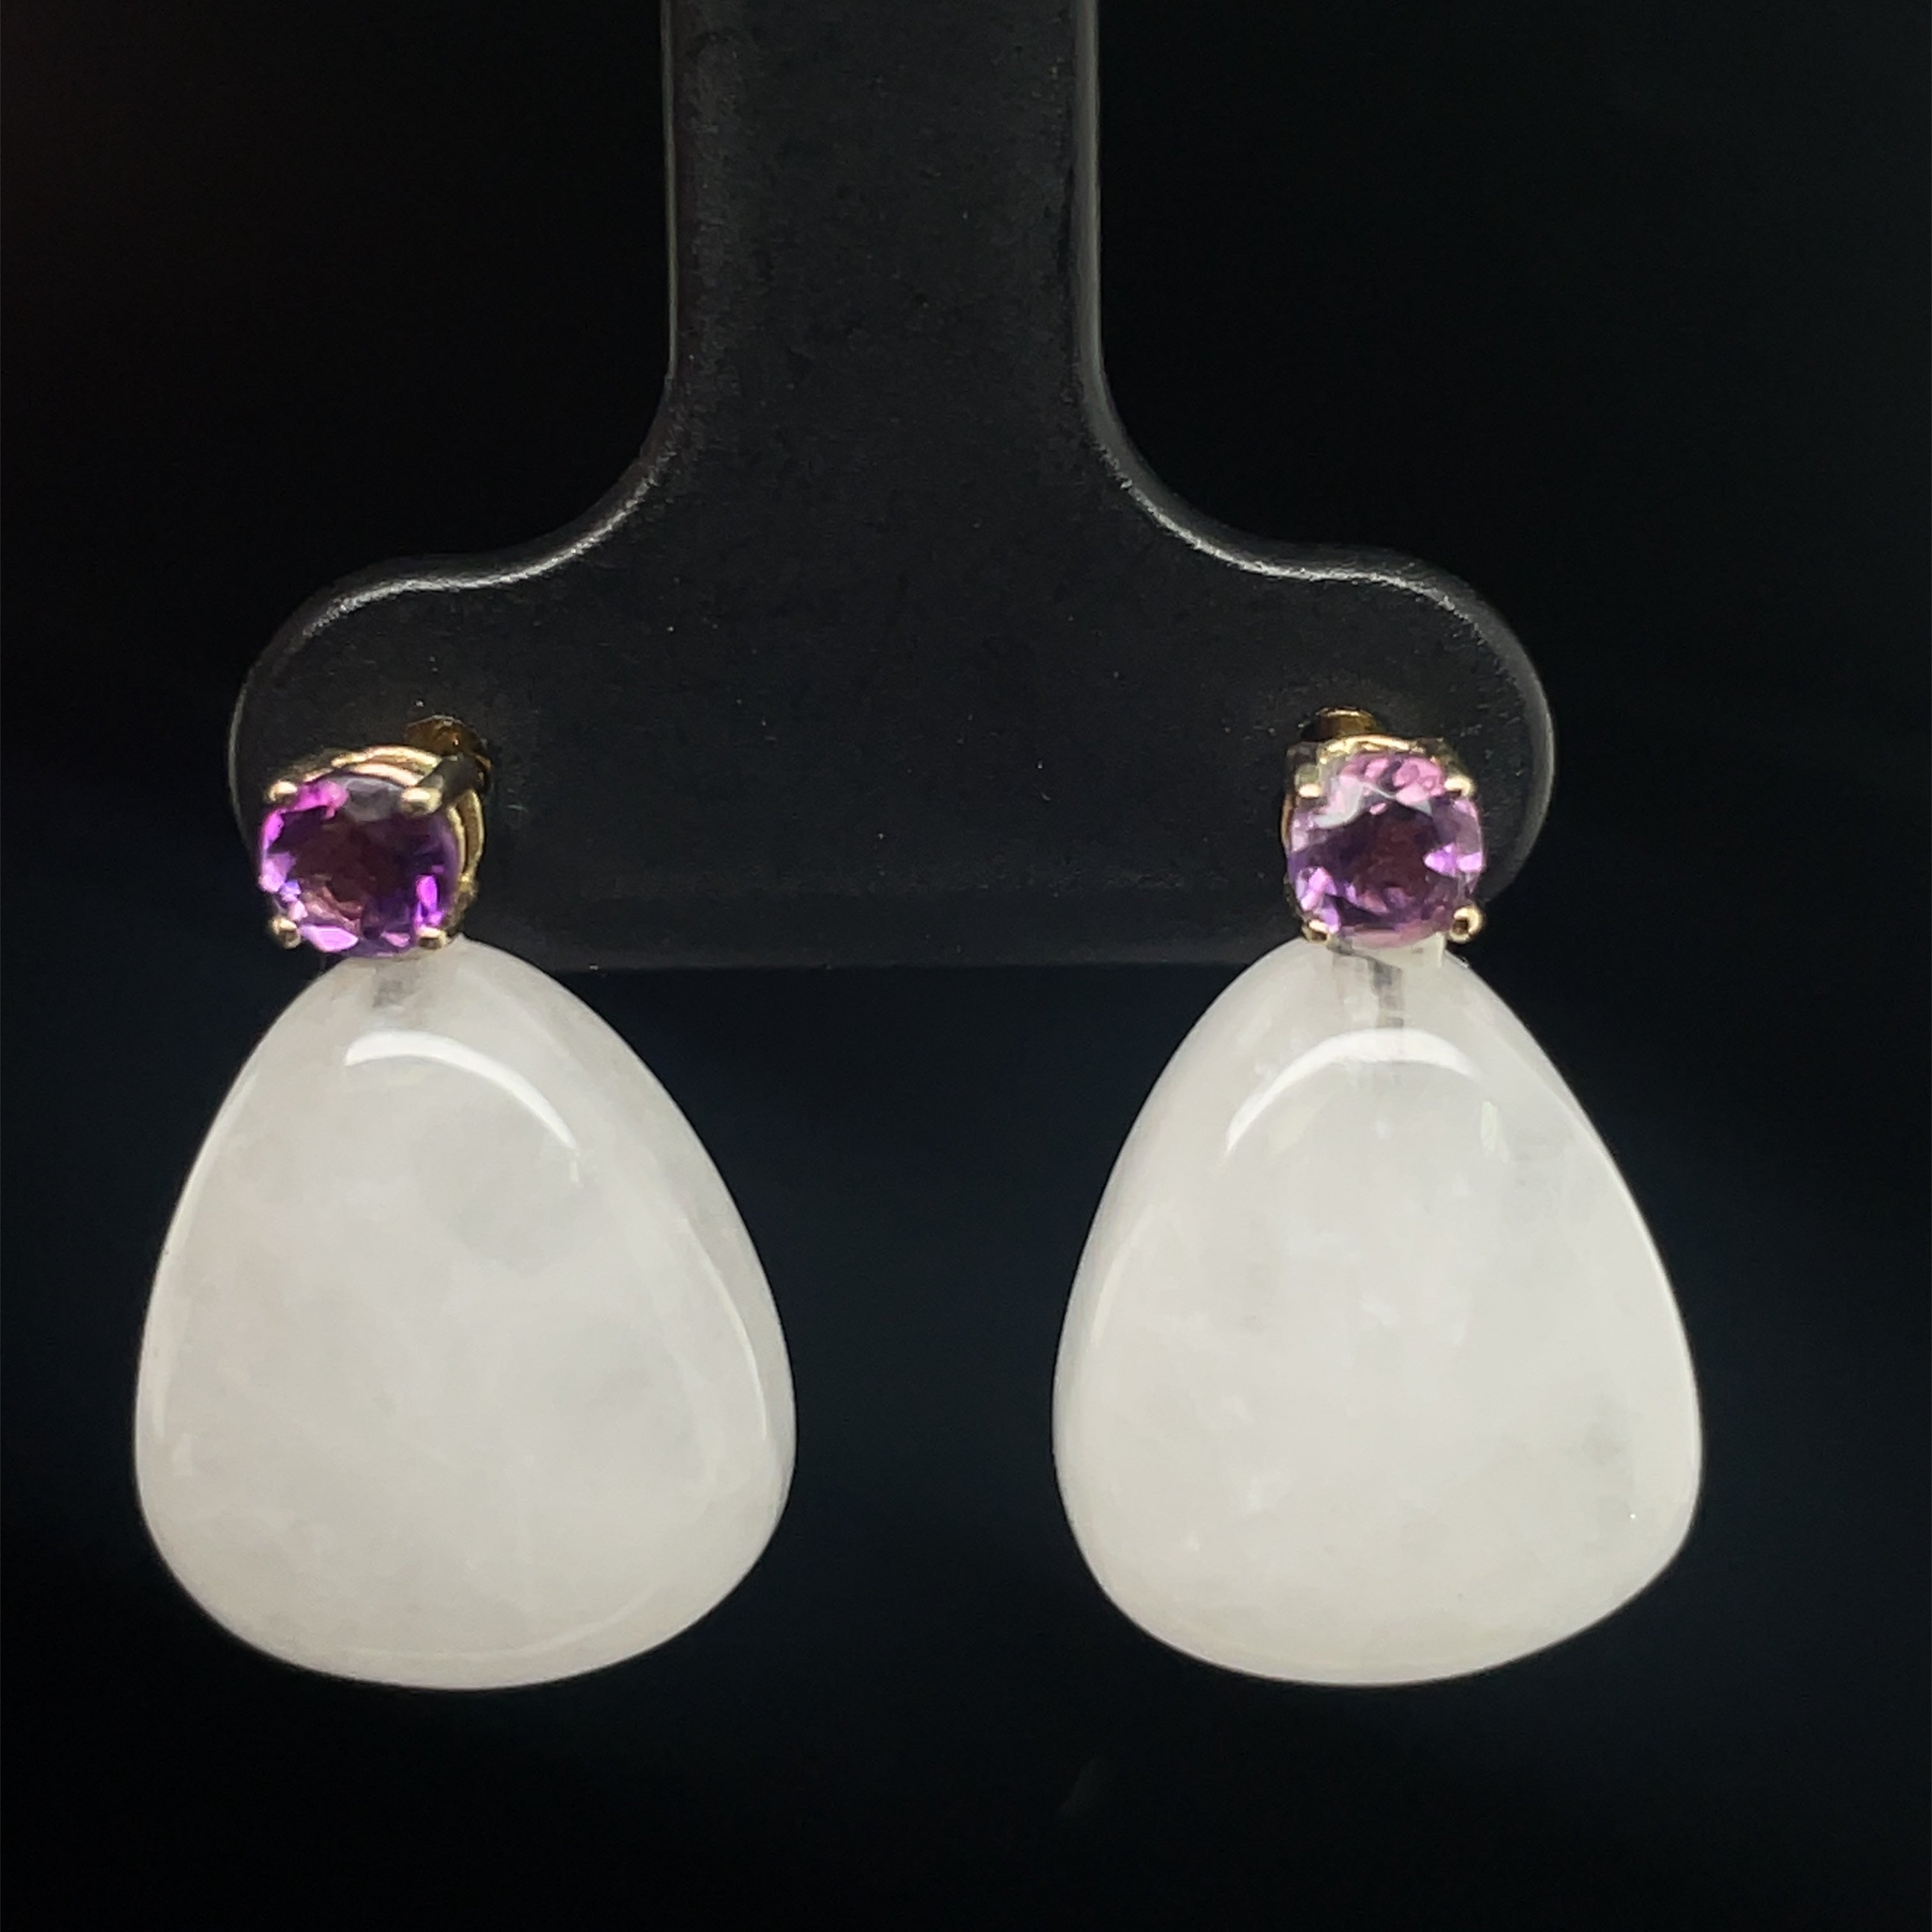 Crafted in 14k yellow gold, these elegant earrings are accented with a pear shape agate cabochon and an amethyst cabochon, measuring 18 x 12 mm and secured with friction backs. 18x12 mm.